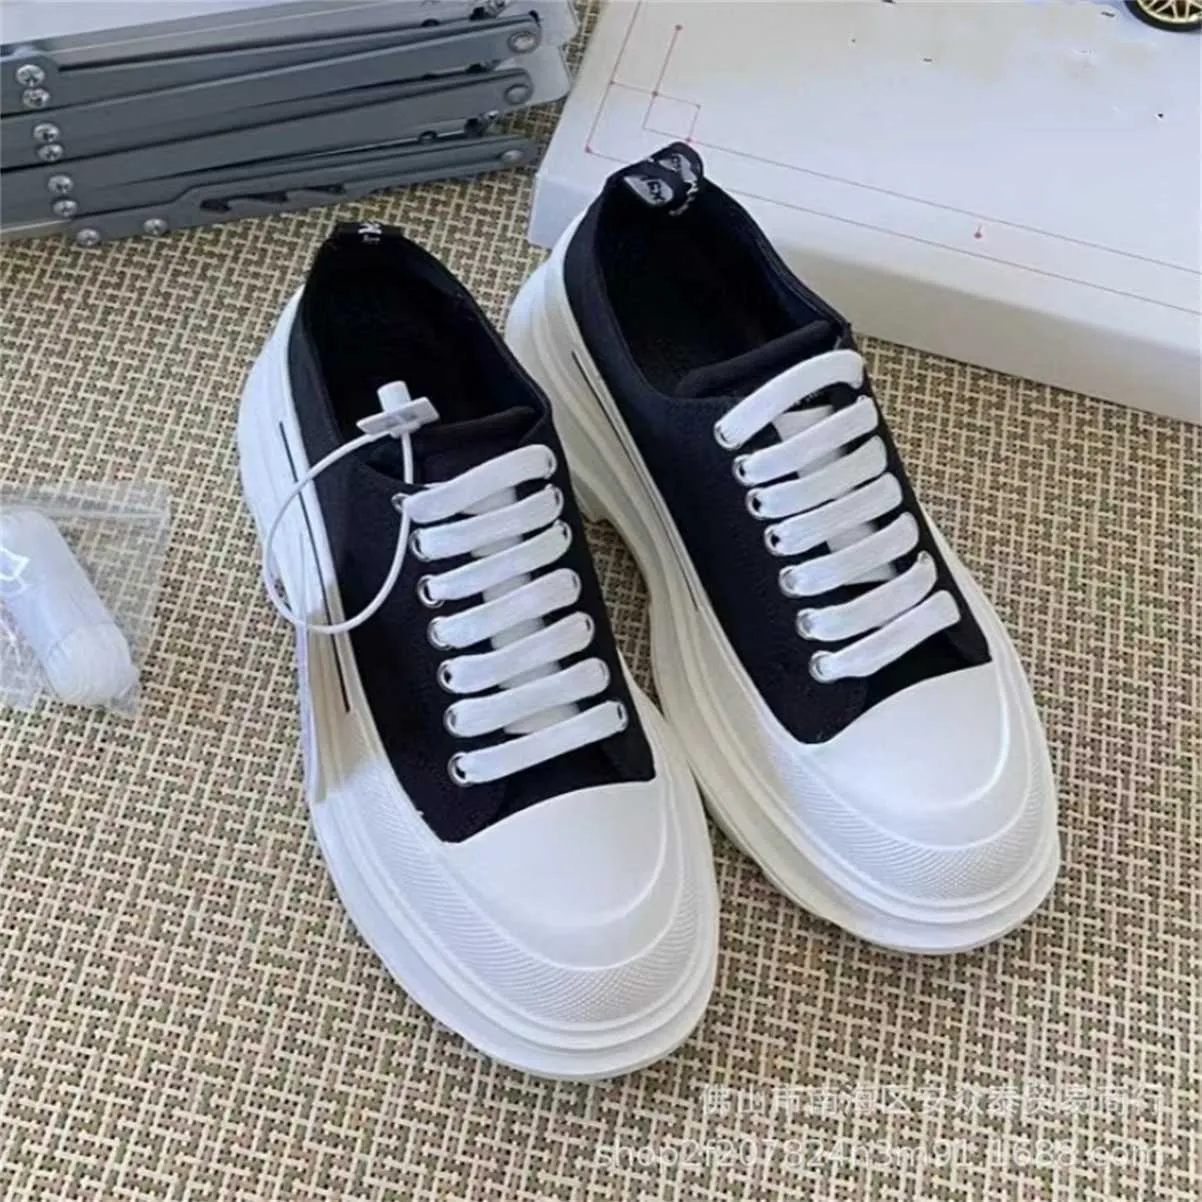 42% OFF Designer Sports shoes couple style round toe tie up board canvas sheepskin lining